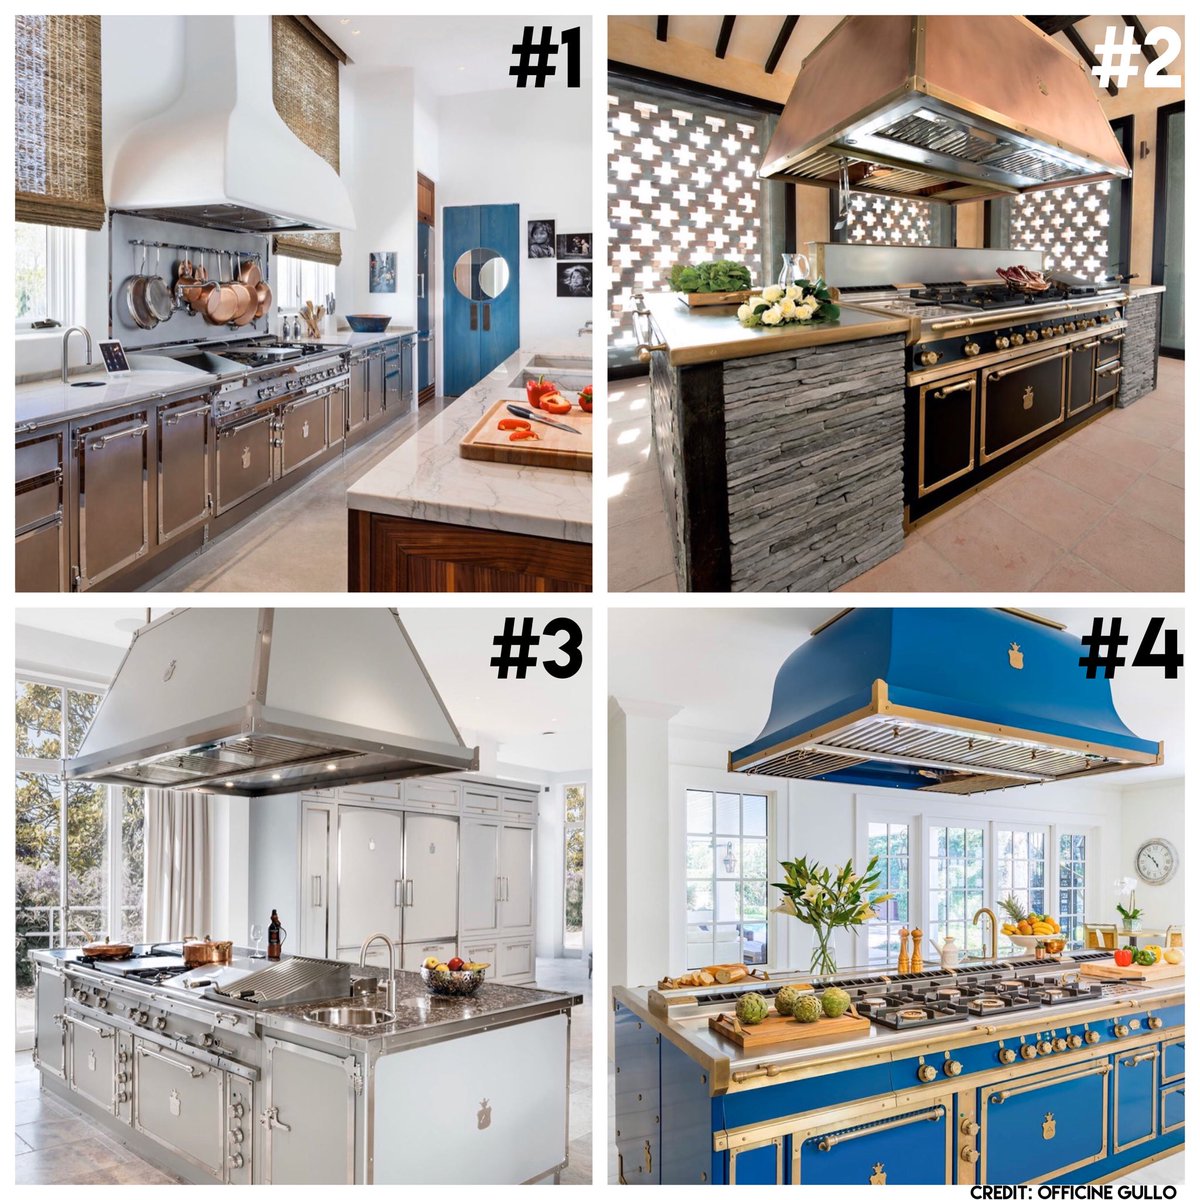 John Farley On Twitter The Kitchen Is The Heart Of The Home Which Of These Kitchens Would You Prefer Realestate Boulder Homedecor